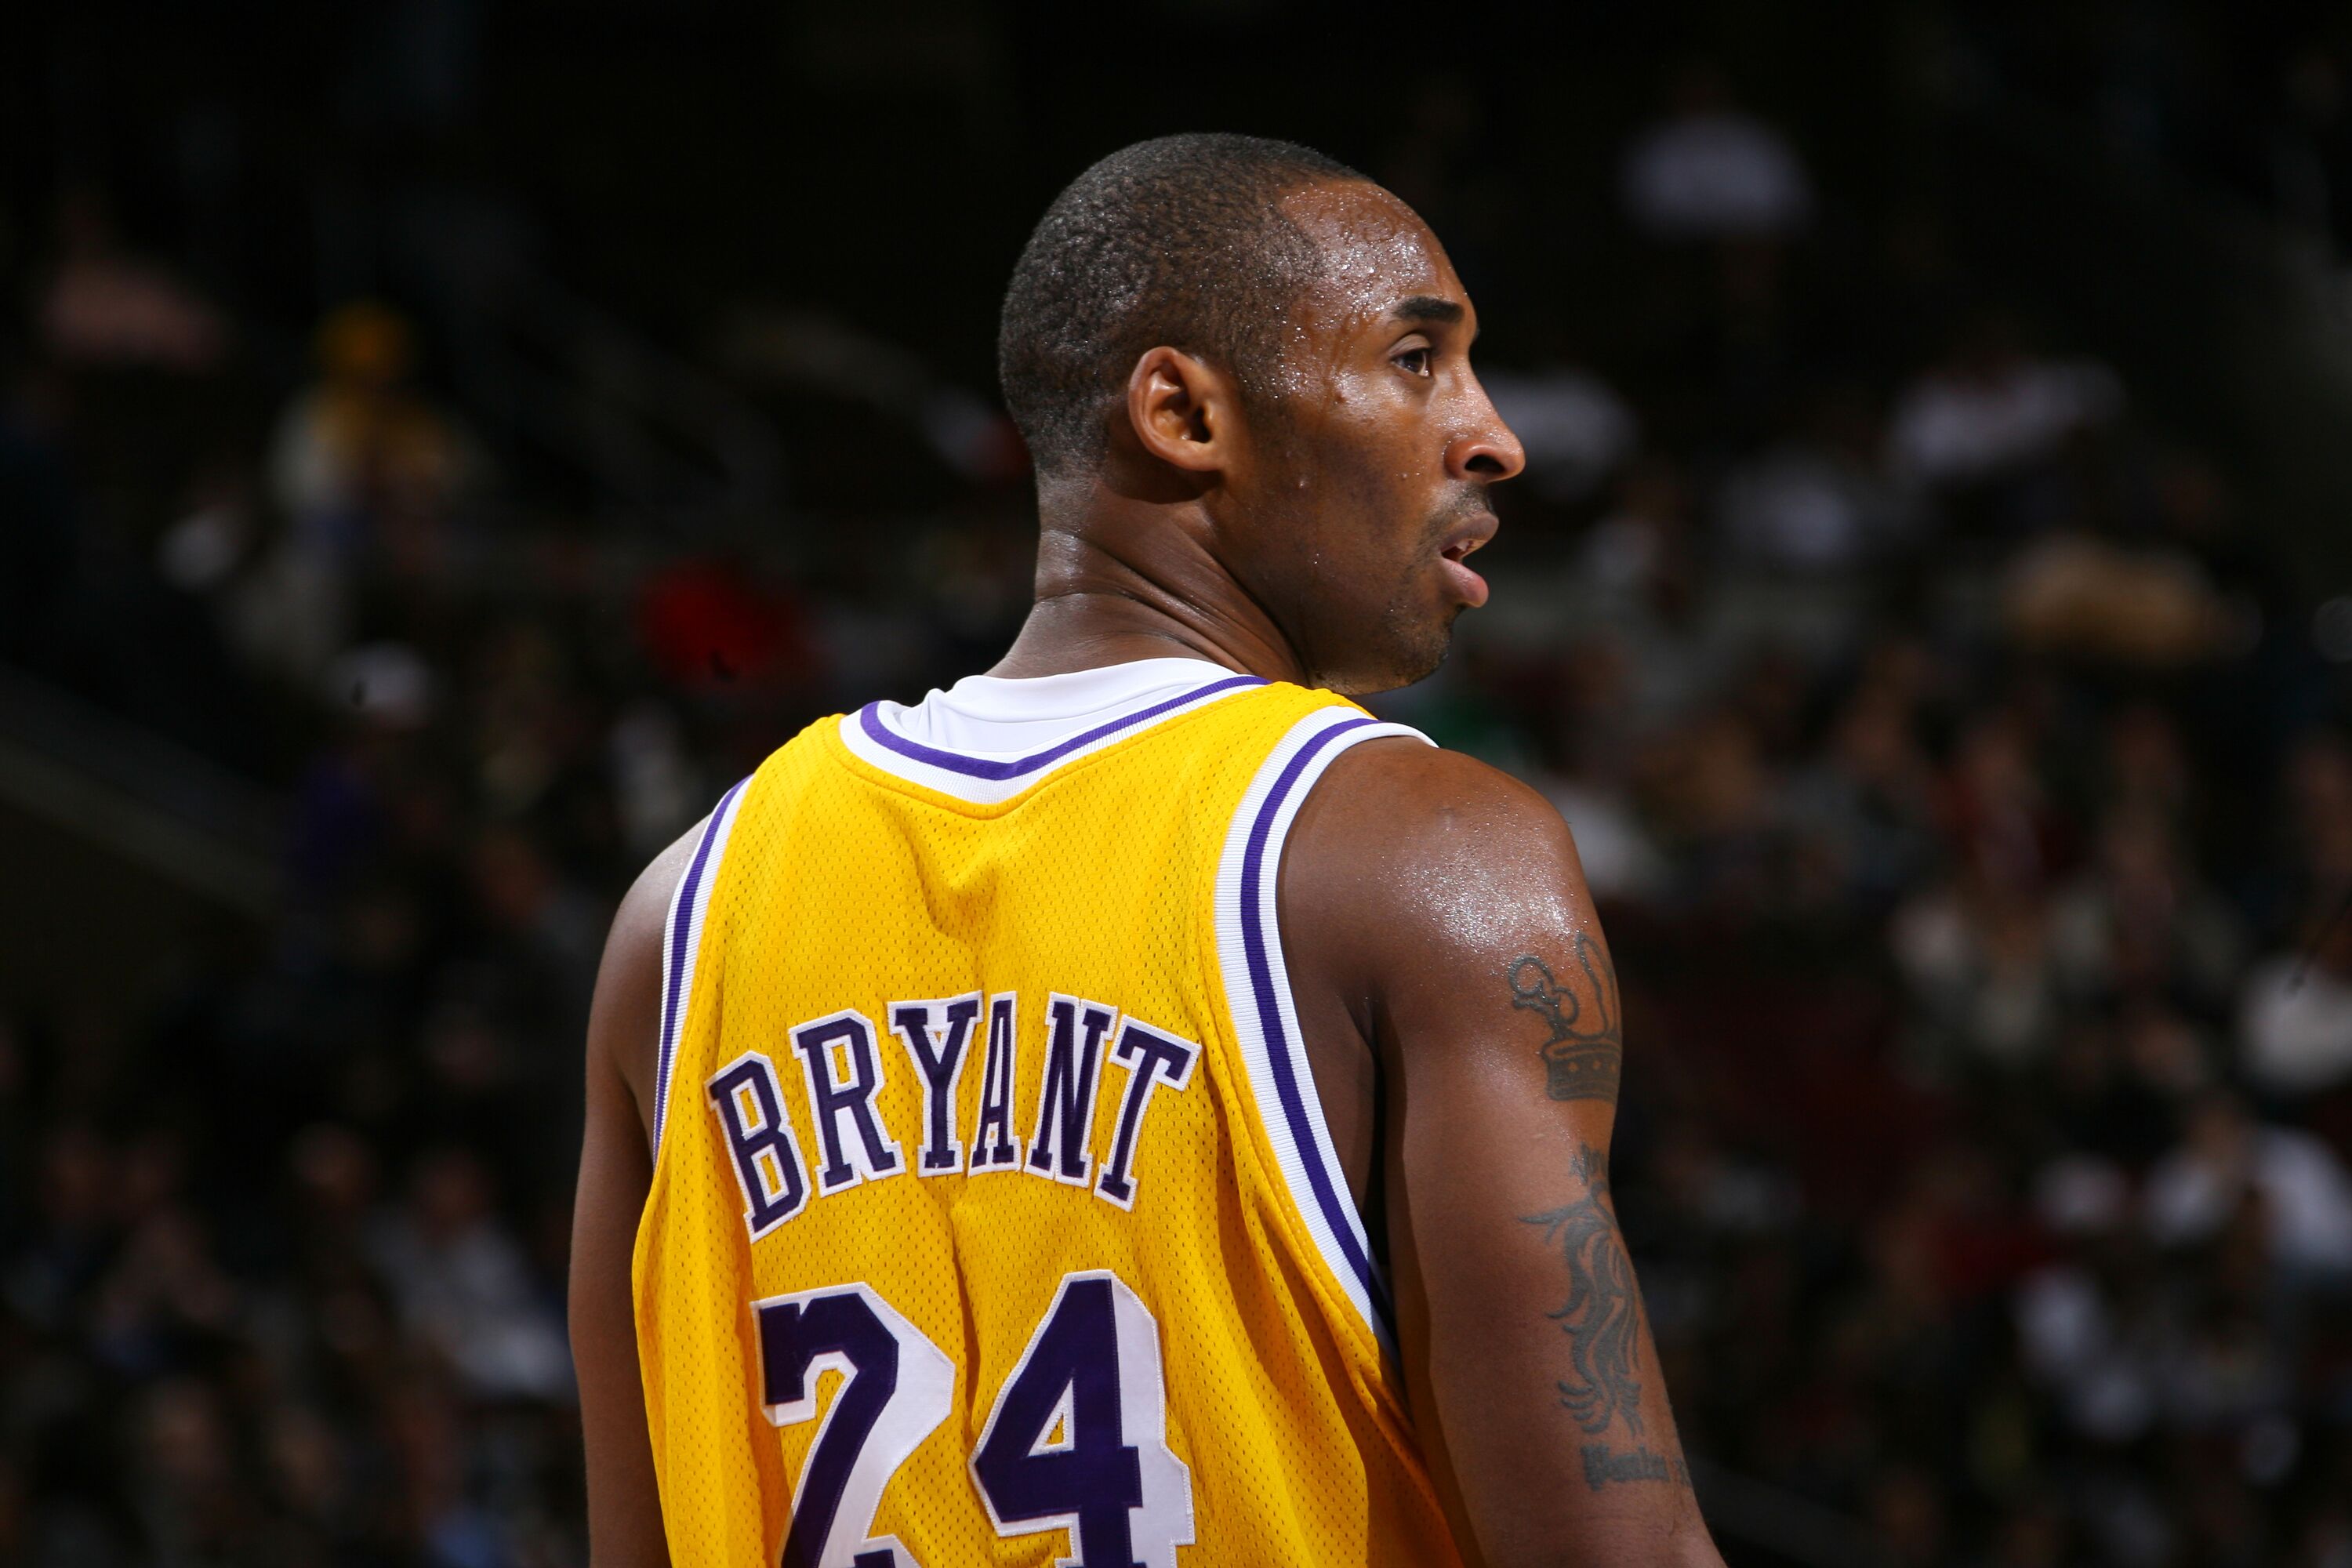 Kobe Bryant playing a game against the Philadelphia 76ers at the Wachovia Center on December 21, 2007, in Philadelphia, Pennsylvania | Photo: Getty Images